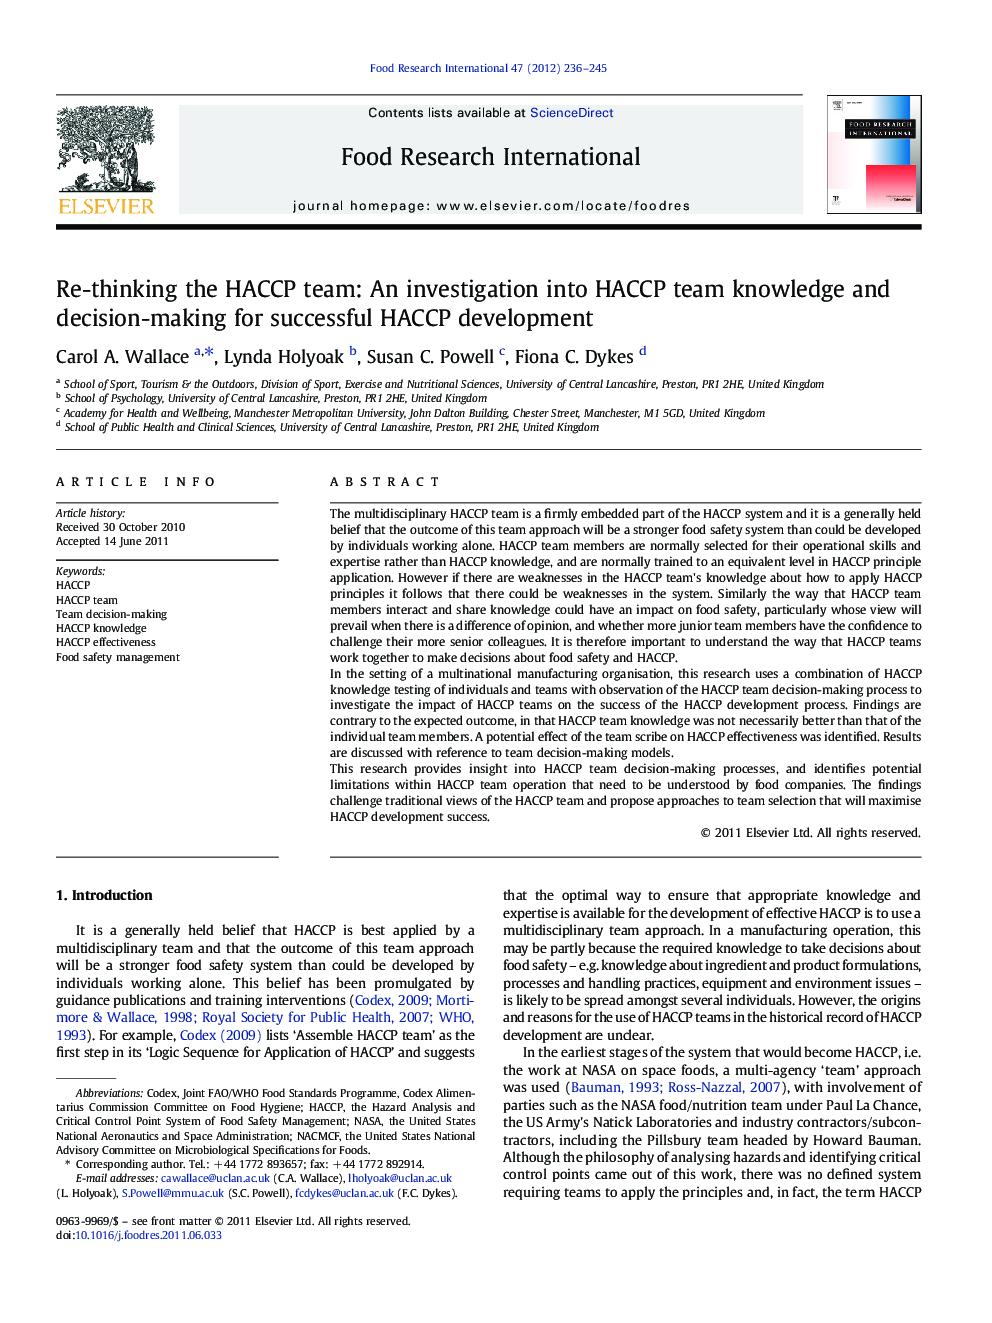 Re-thinking the HACCP team: An investigation into HACCP team knowledge and decision-making for successful HACCP development